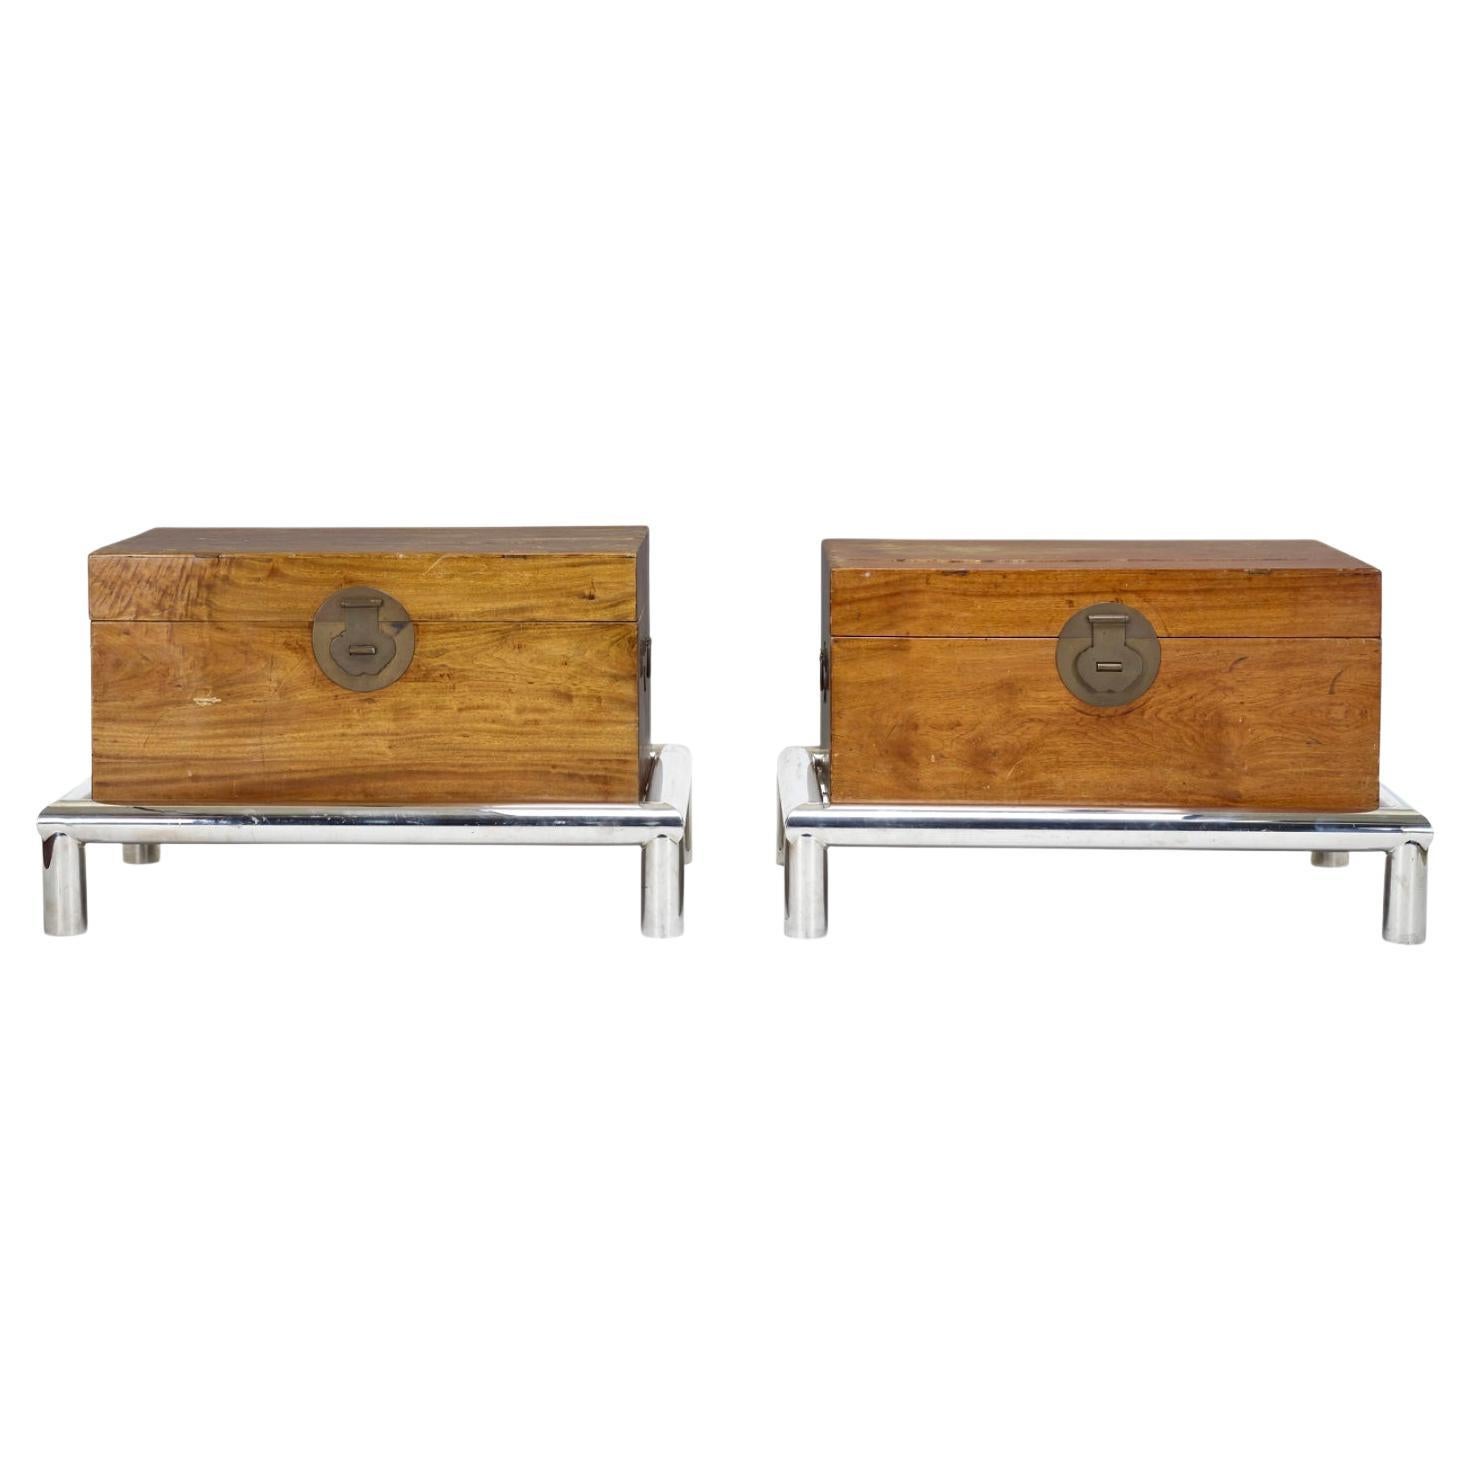 John Mascheroni custom Tubo Trunk pair, walnut, stainless steel, brass, c. 1975. This is an exceptionally rare Mid-Century Modern custom walnut trunk designed by John Mascheroni for his TUBO series produced by Vecta furniture in the 1960s. Iconic